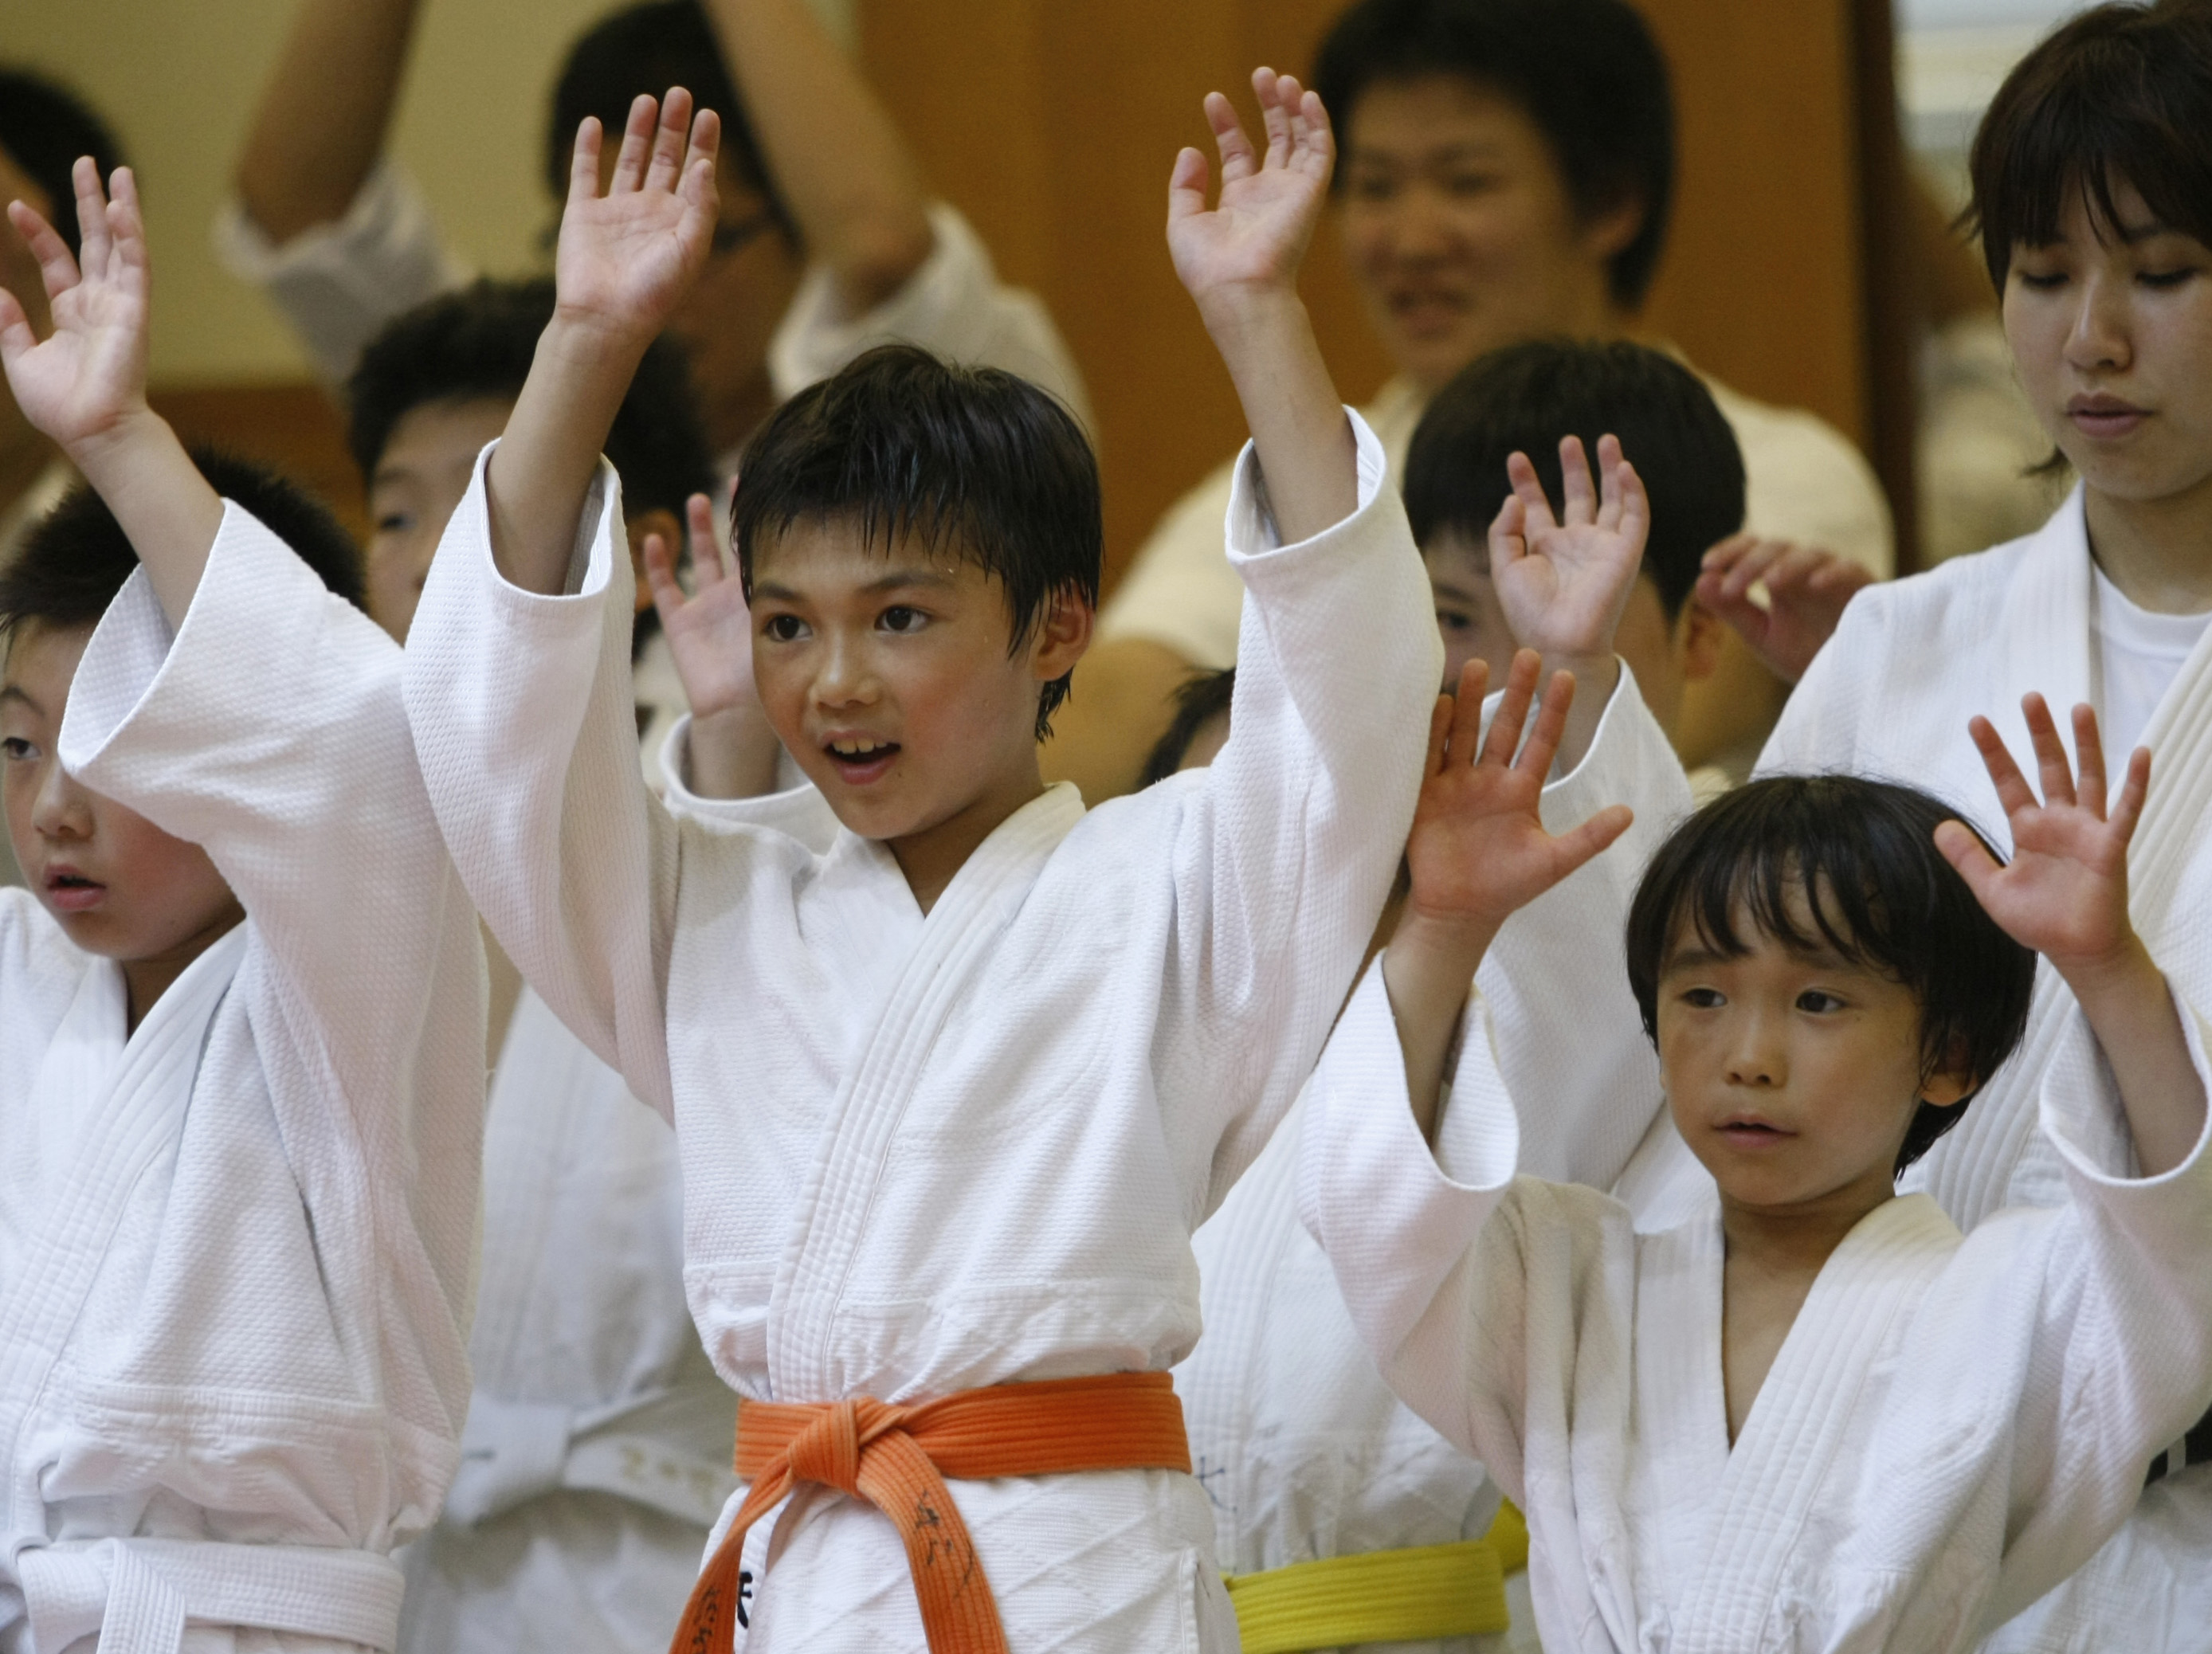 Children cheer on Japan's national judo team at a ceremony in Tokyo